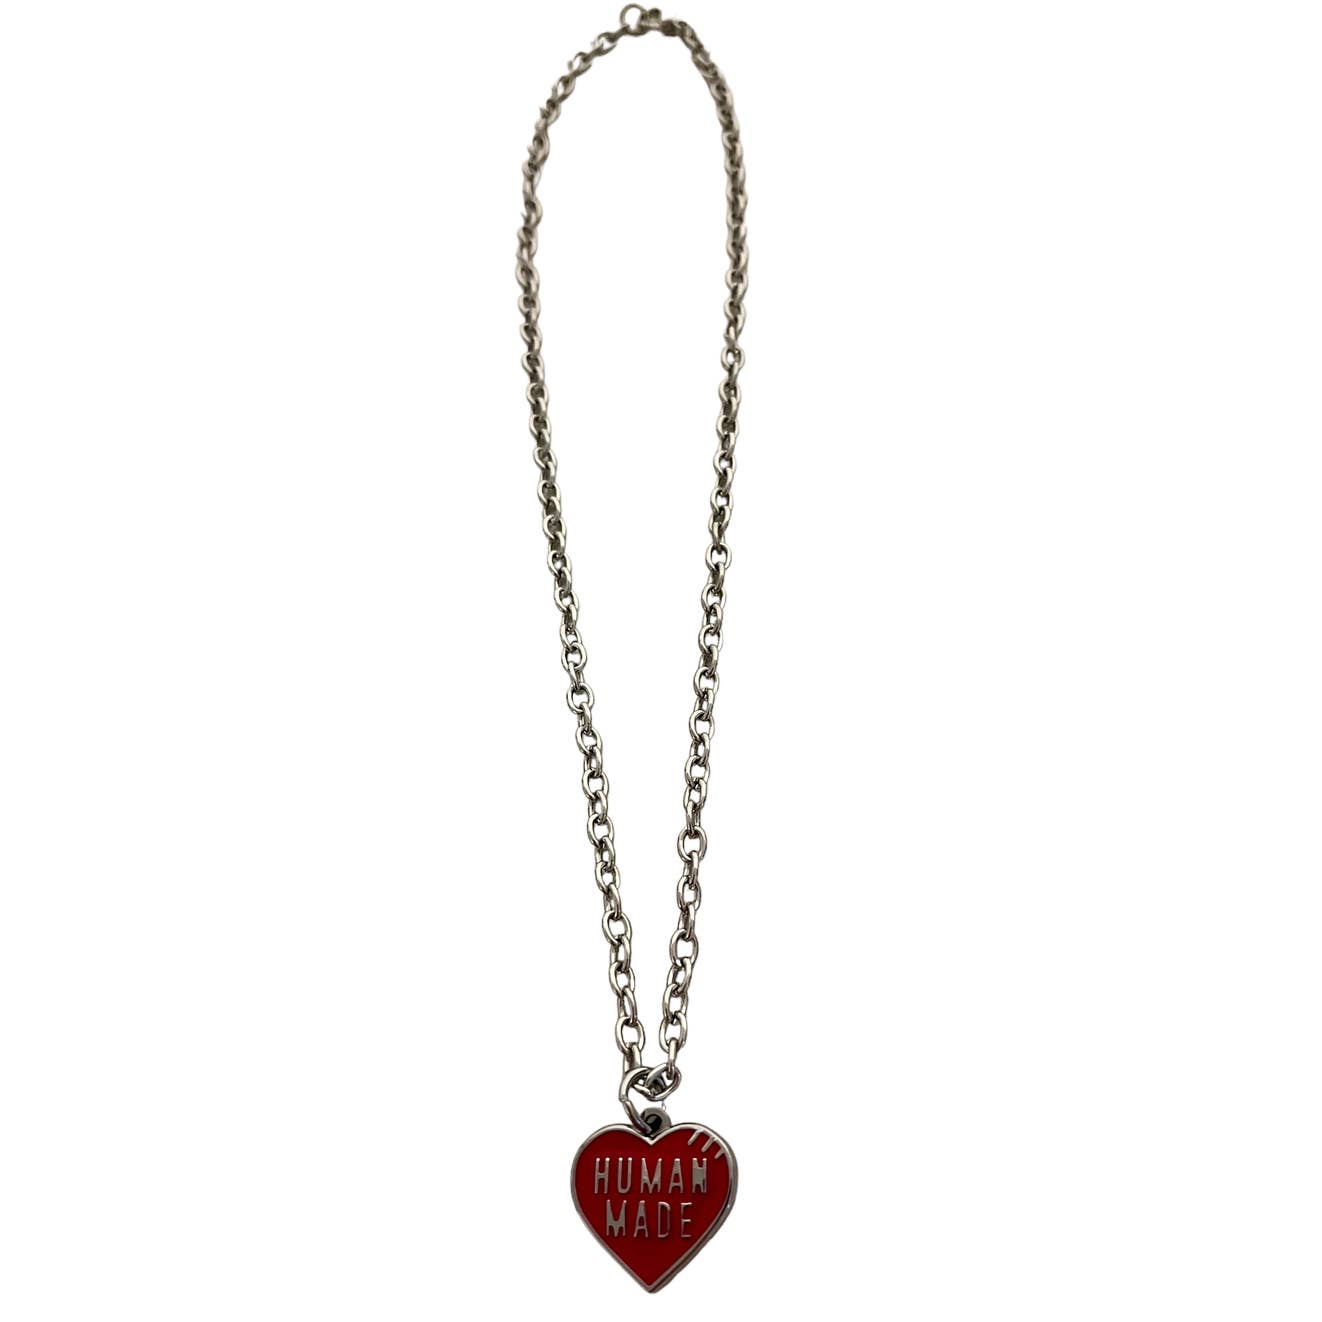 Human Made x Girls Don't Cry Heart Necklace - Red